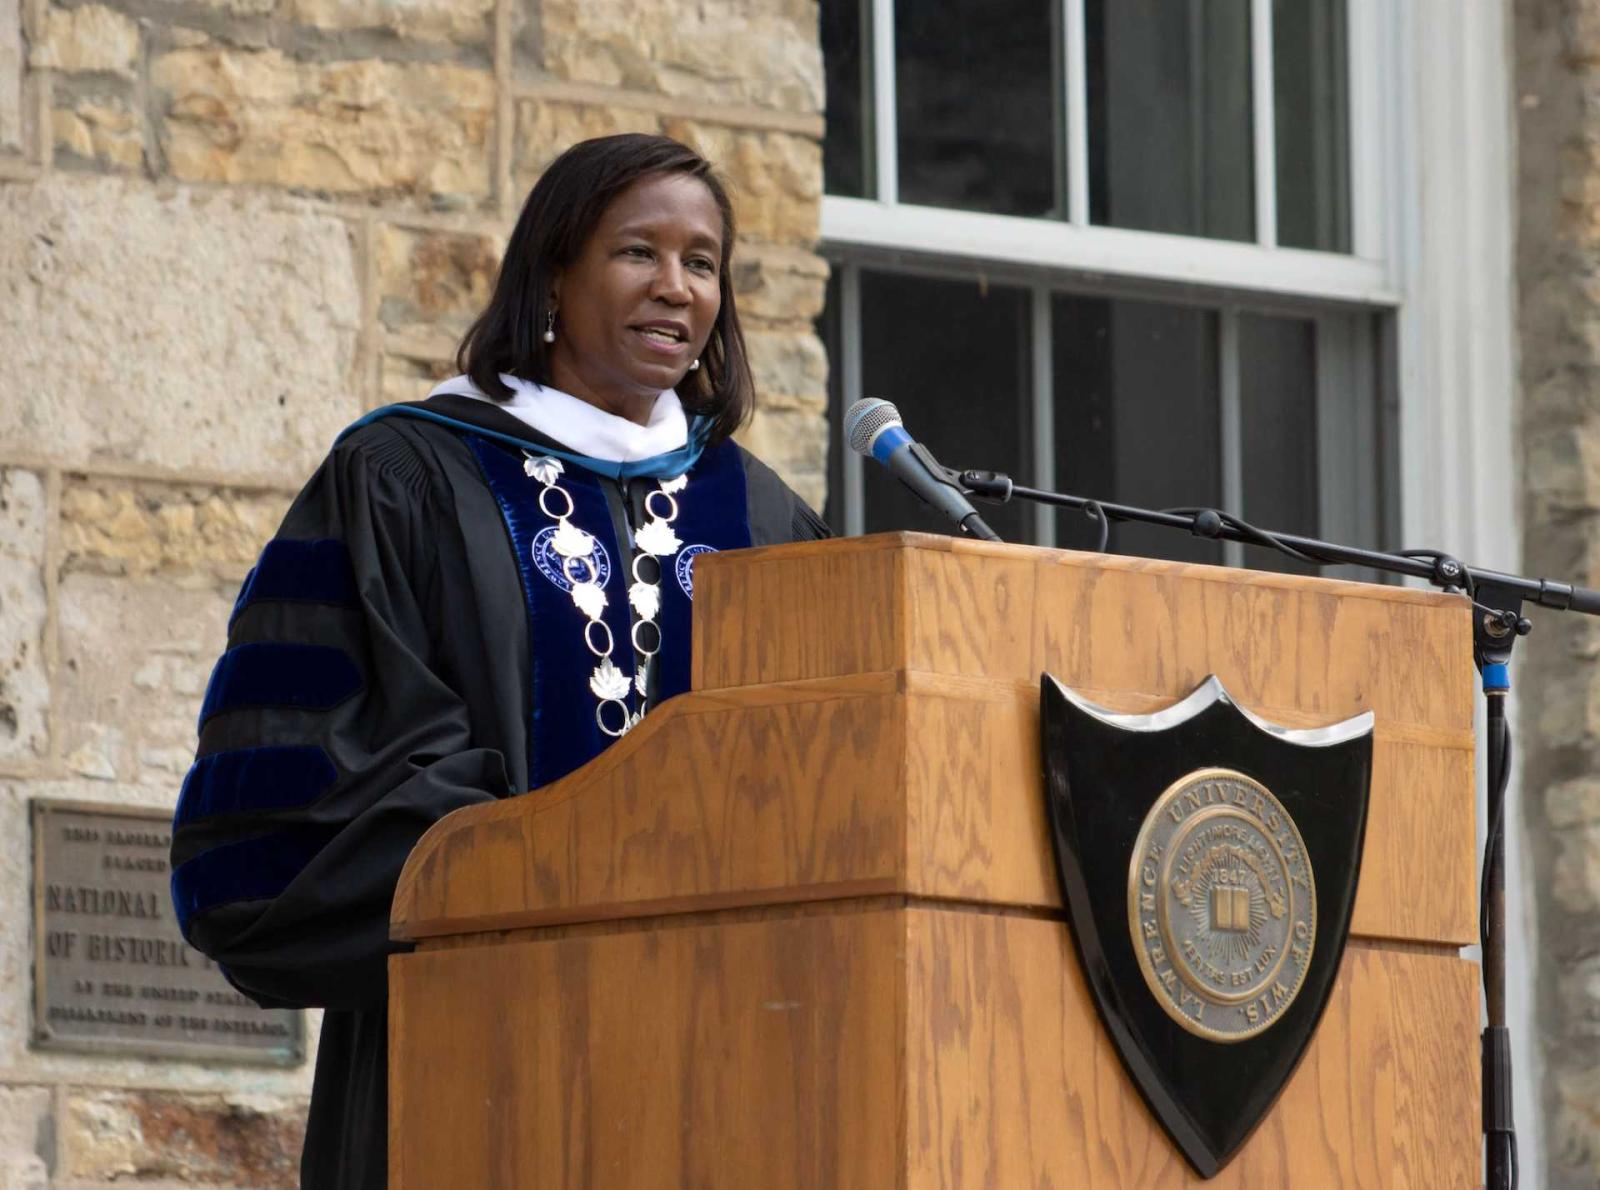 President Laurie A. Carter speaks into a microphone behind a lectern with Lawrence's seal on it.